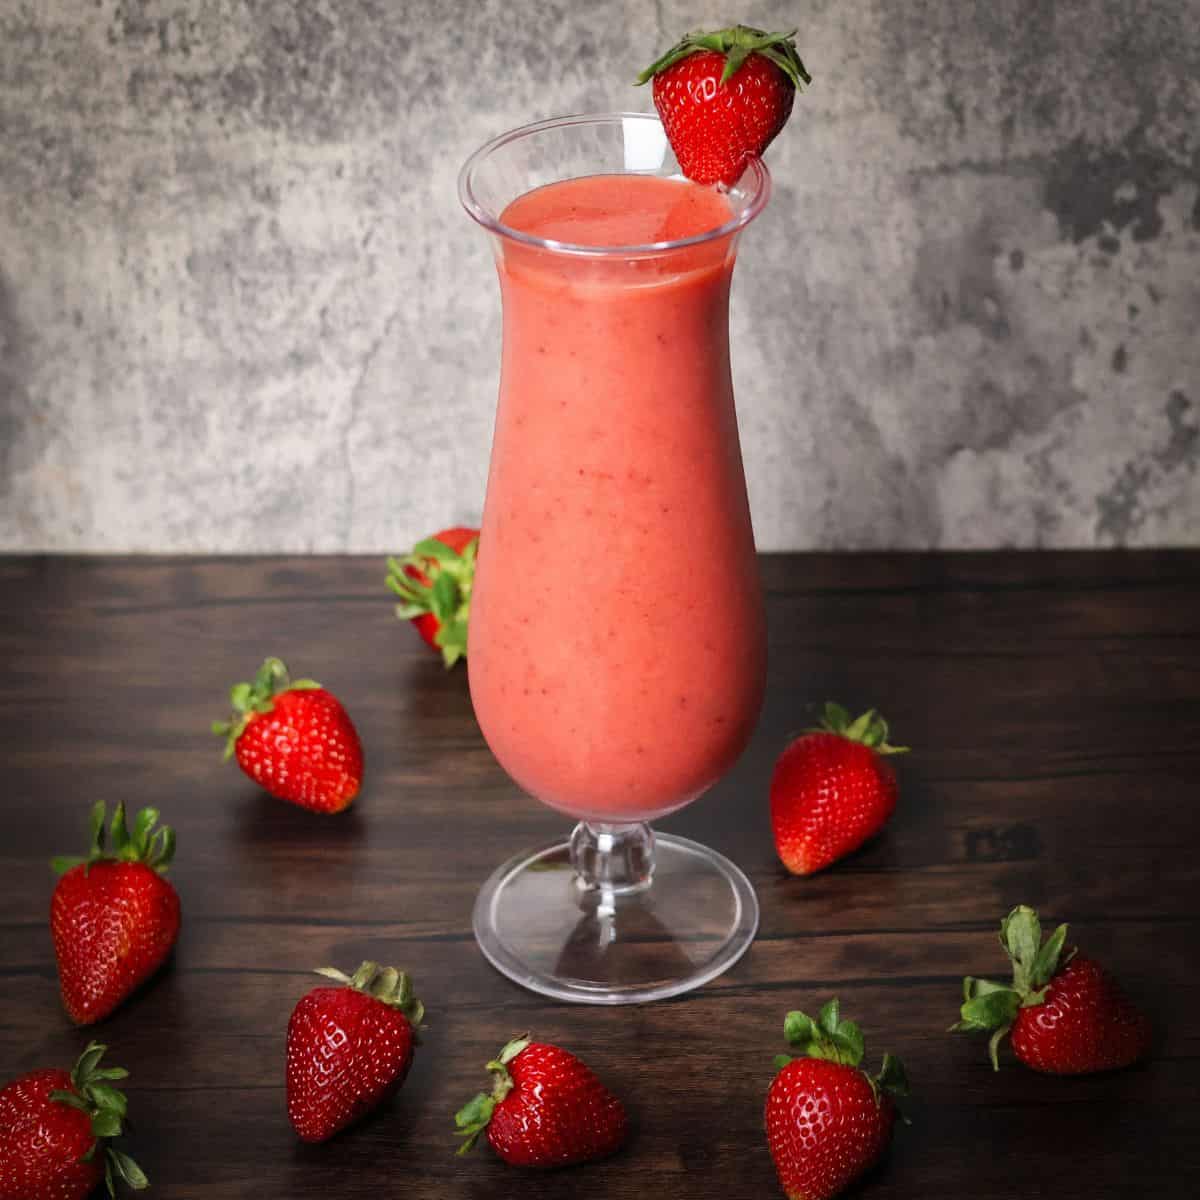 A freshly blended strawberry smoothie in a clear hurricane glass, garnished with a whole strawberry 